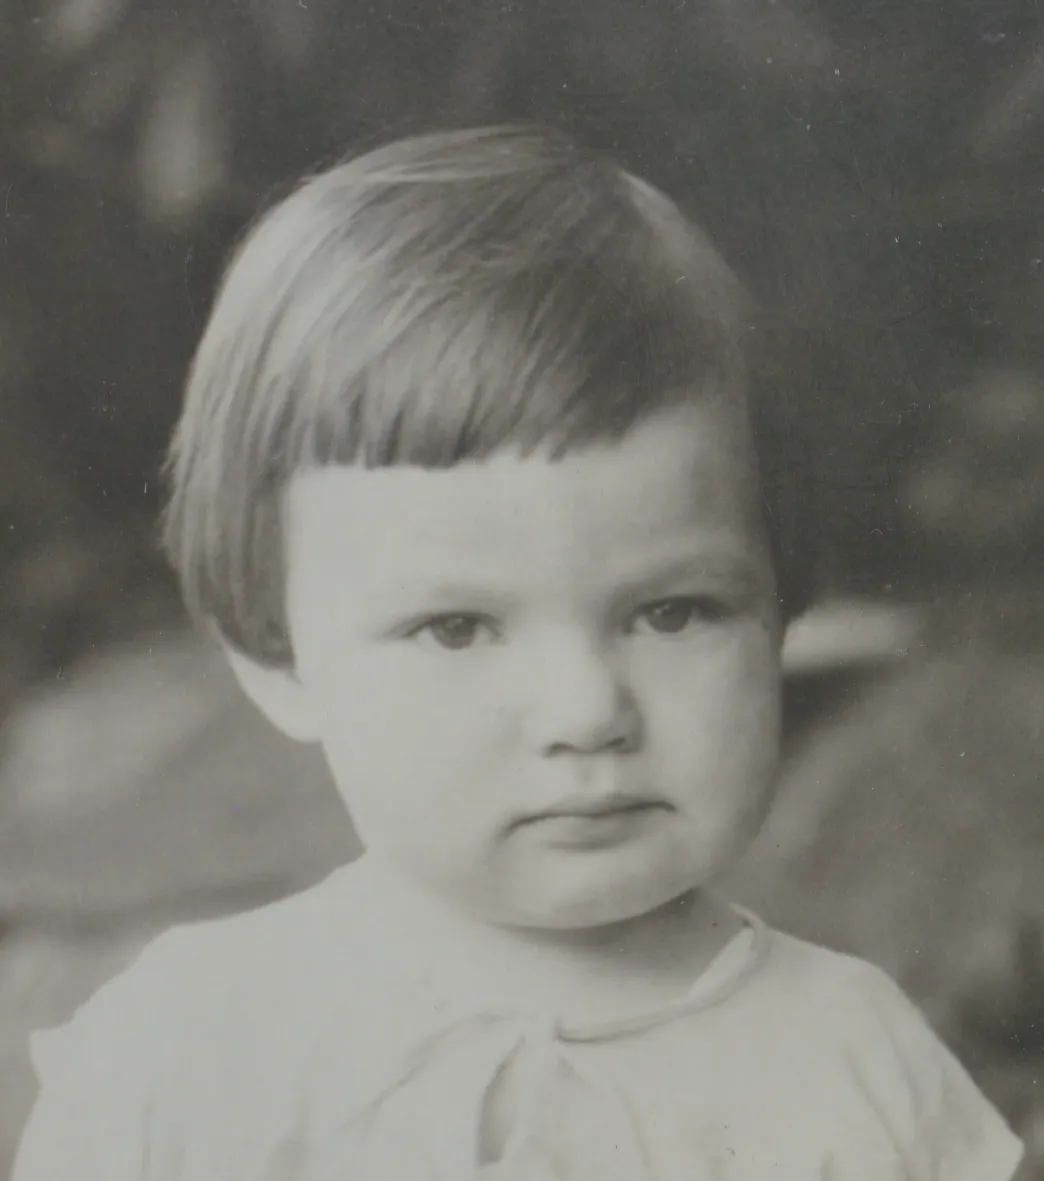 1930 - Irene Dwana Picket, born on Thursday, 1927-01-27, she is probably 4 or younger in this photo, headshot, 1pic.png